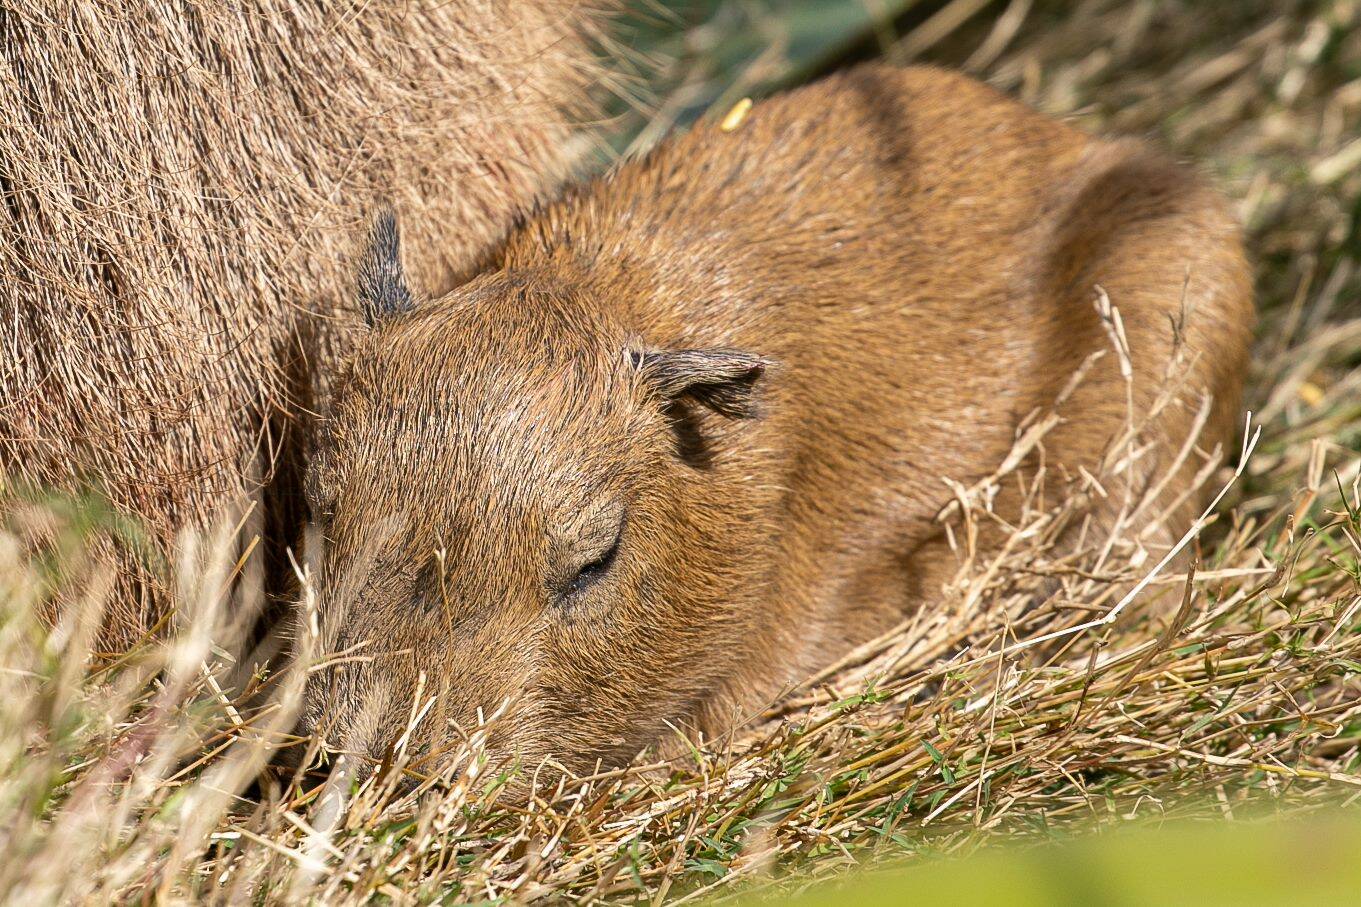 Zoo's 'romantic' efforts bring arrival of first capybara baby in